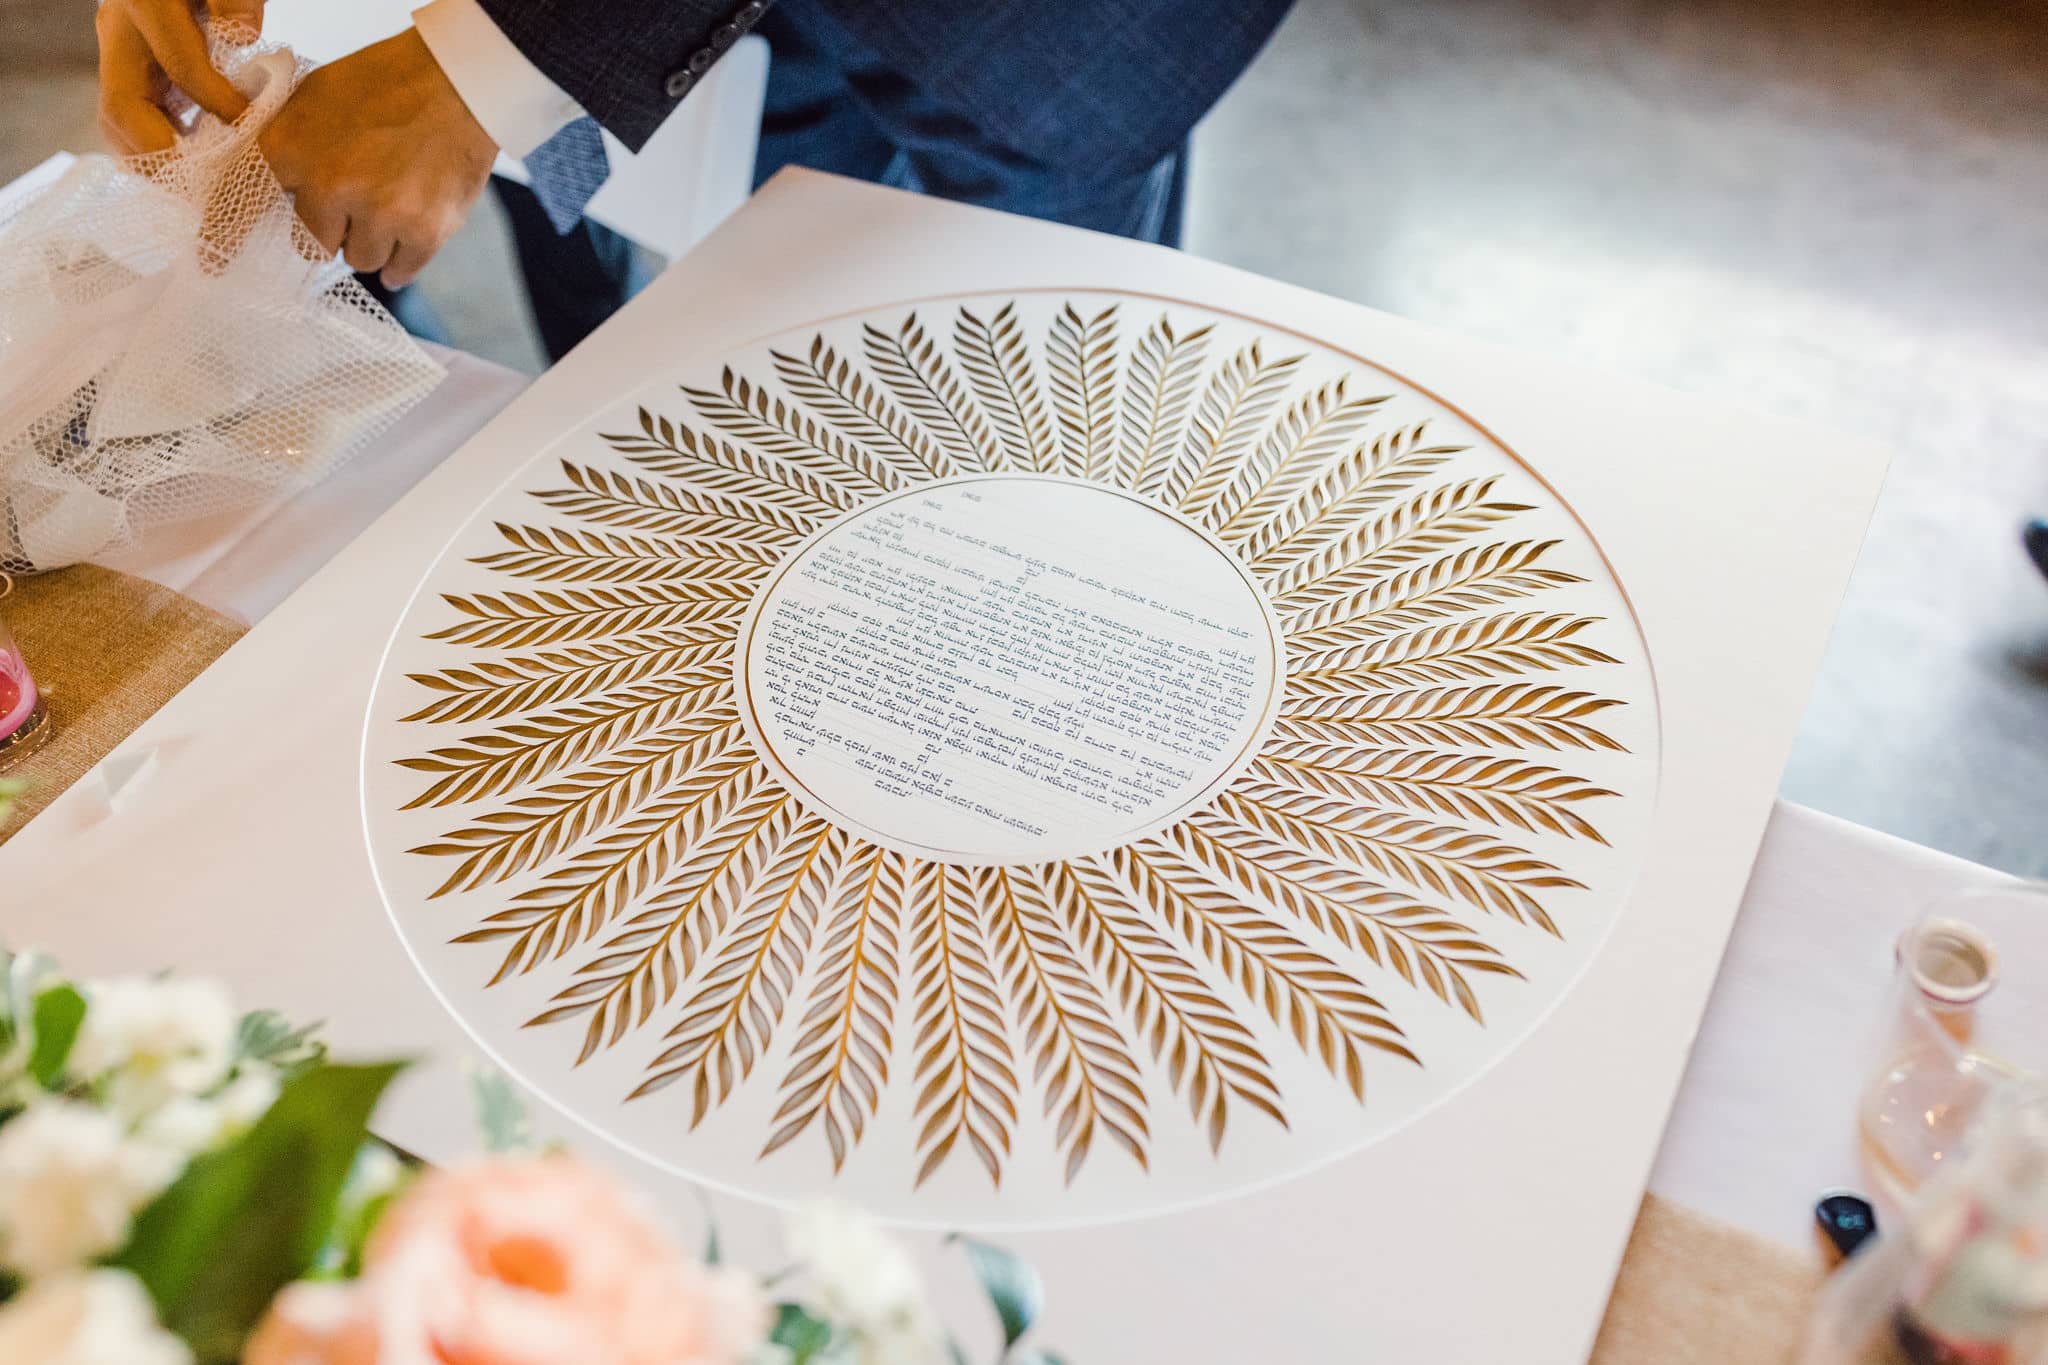 Image of a customized Ketubah combining Jewish and Japanese art elements